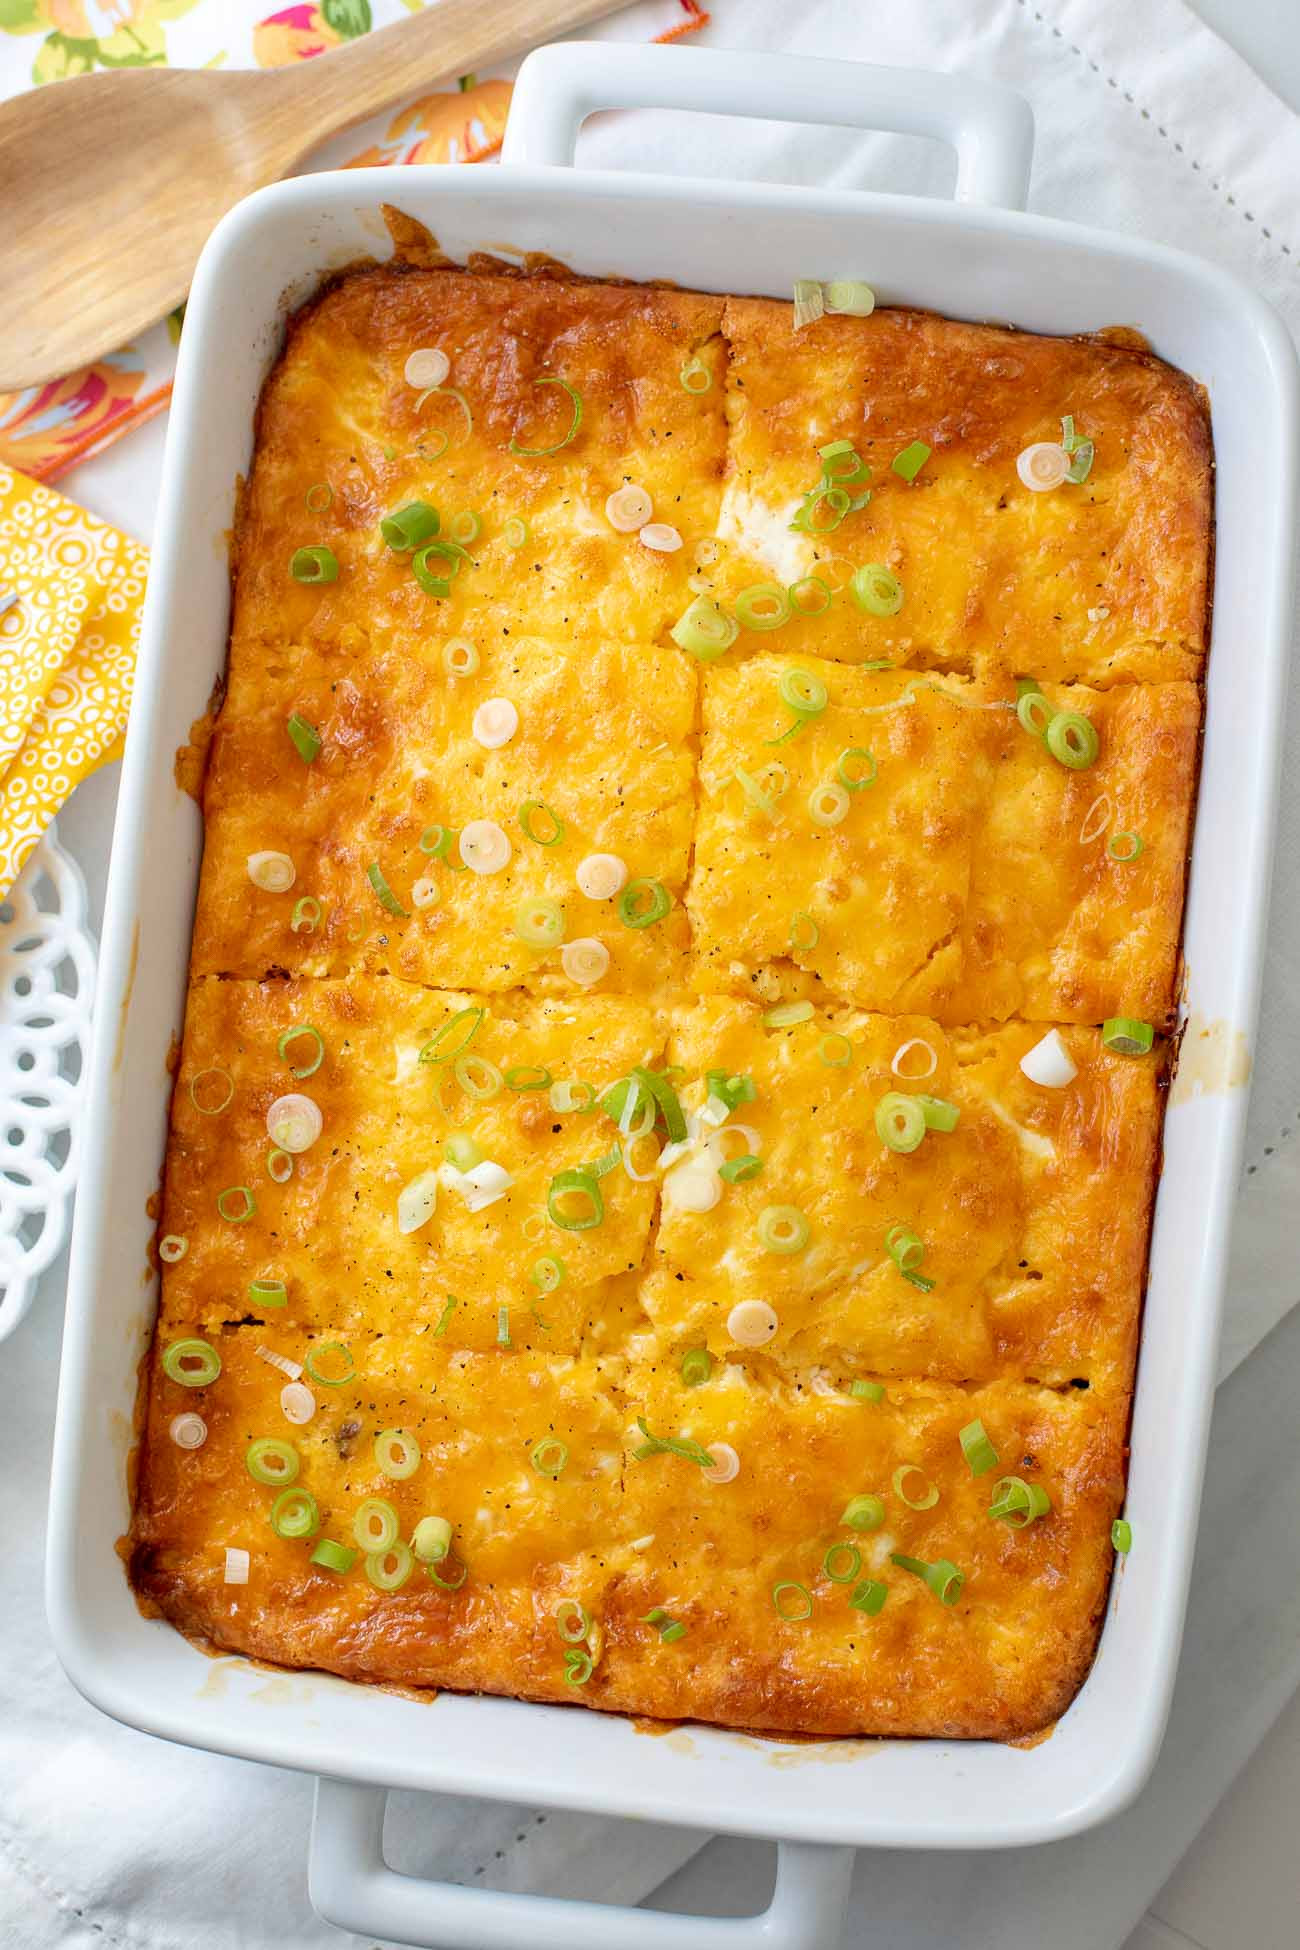 Keto Breakfast Casserole Sausage
 Keto Breakfast Casserole with Sausage and Eggs Low Carb